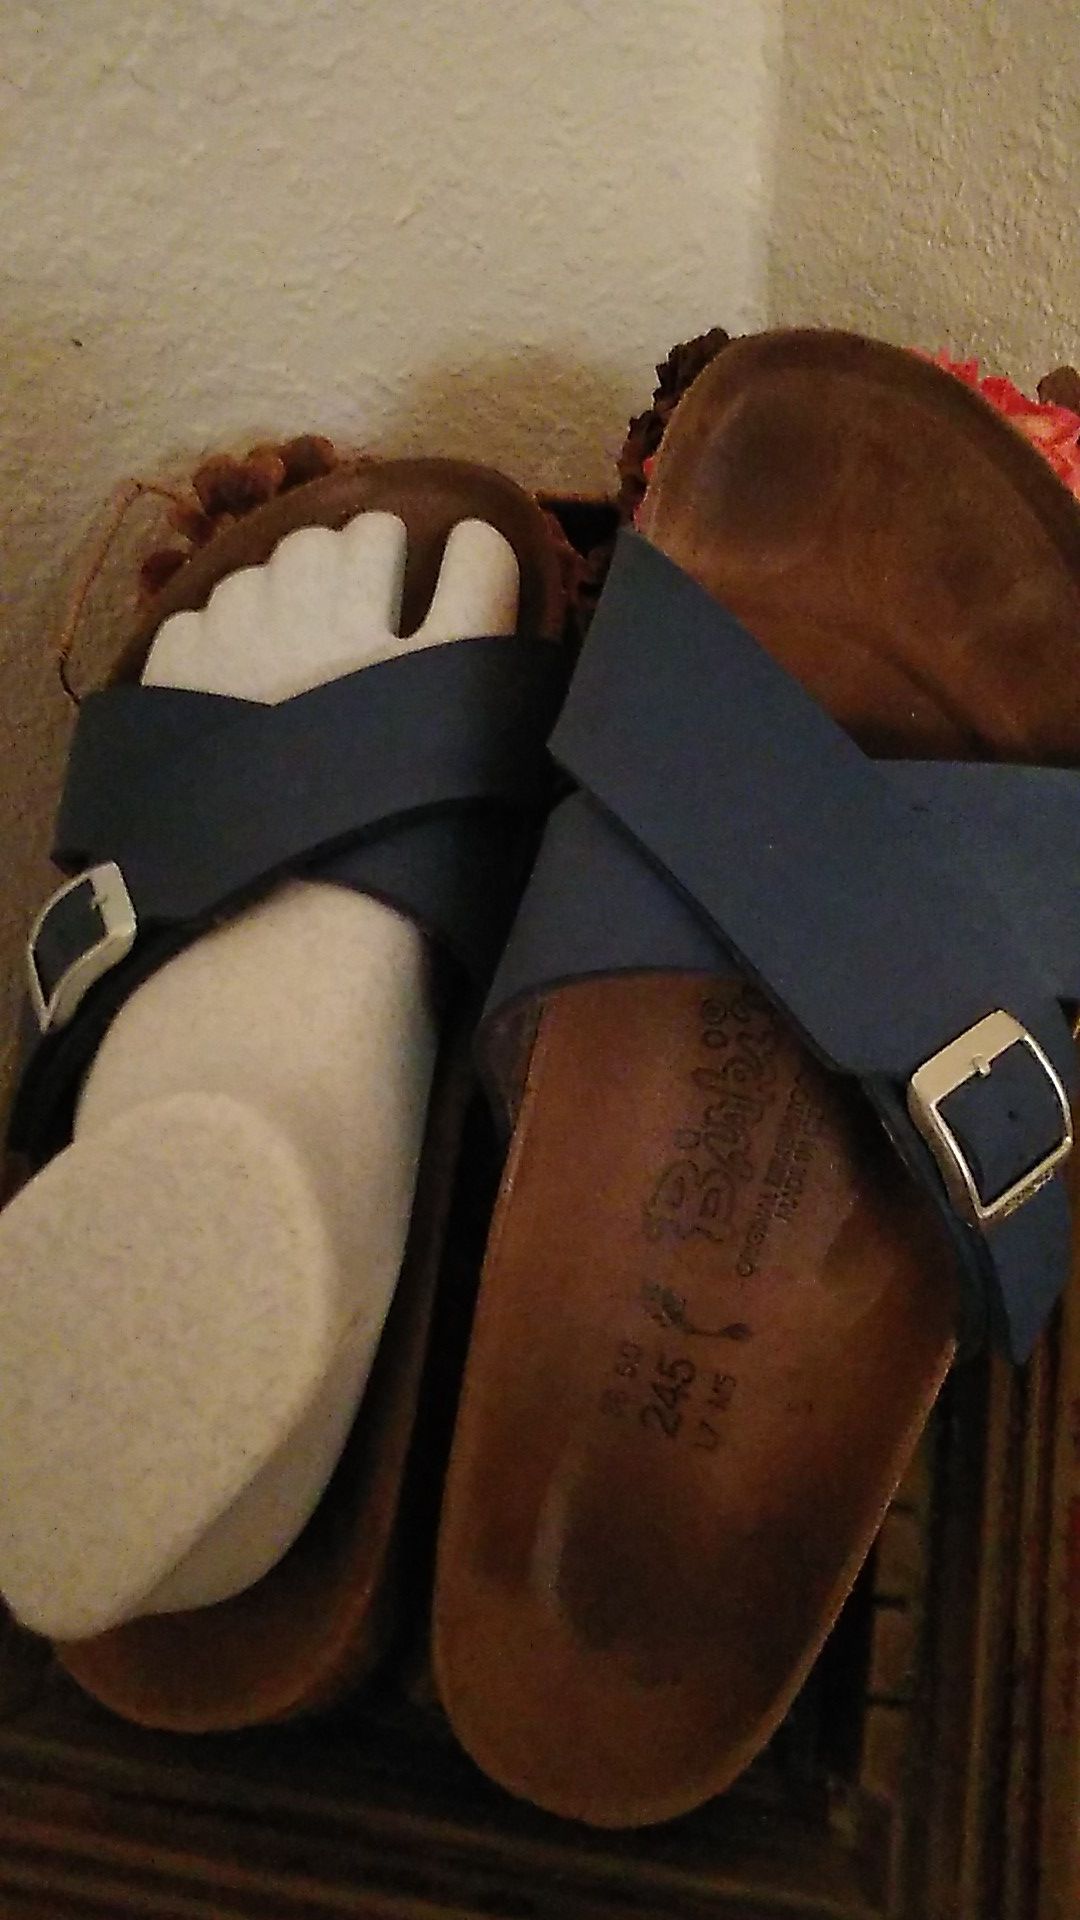 Birkenstocks....blue leather sandals..38/7.....,................ shipping will show when you accept offer.